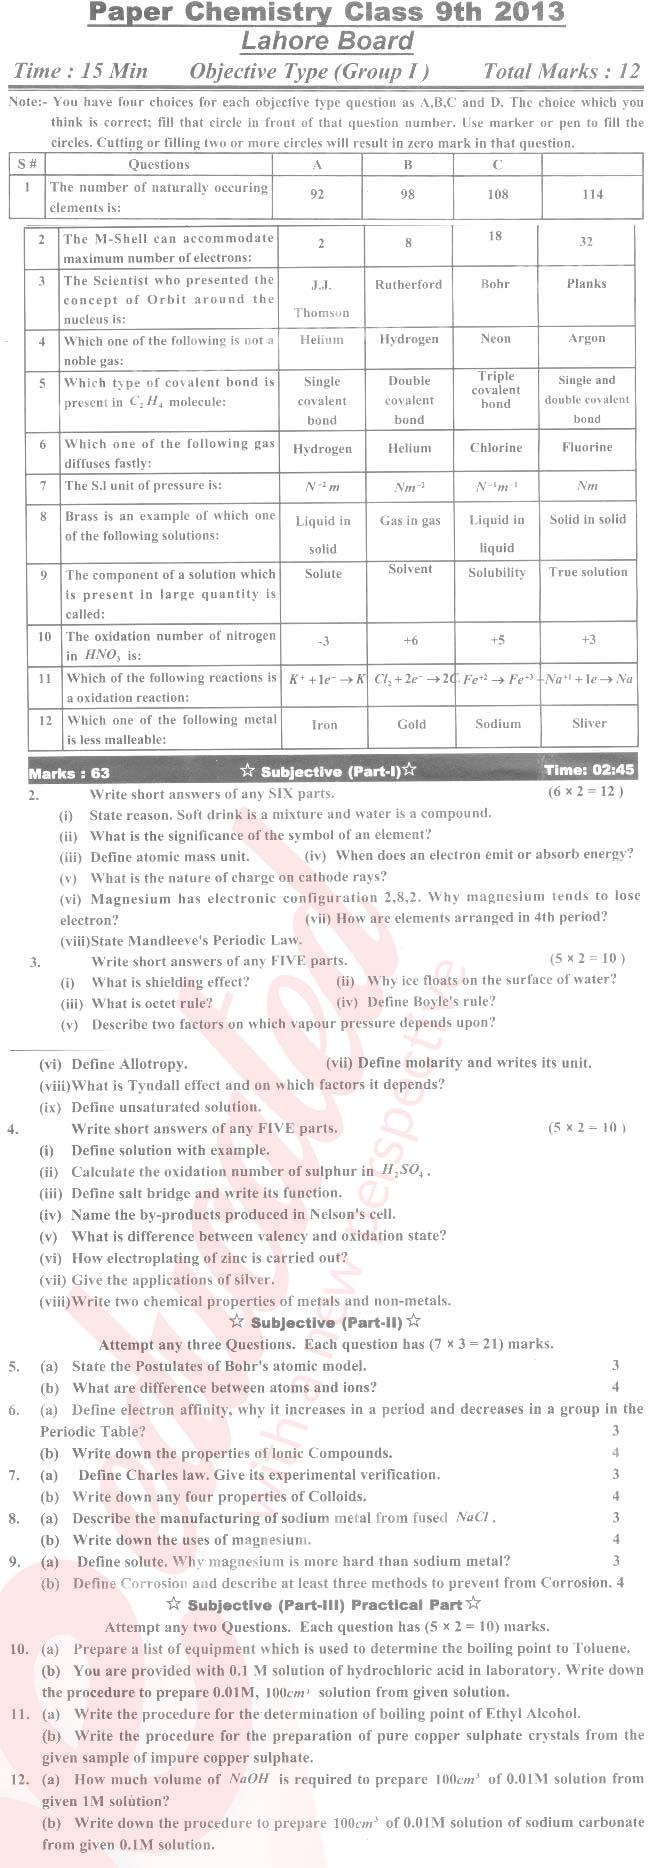 Chemistry 9th English Medium Past Paper Group 1 BISE Lahore 2013